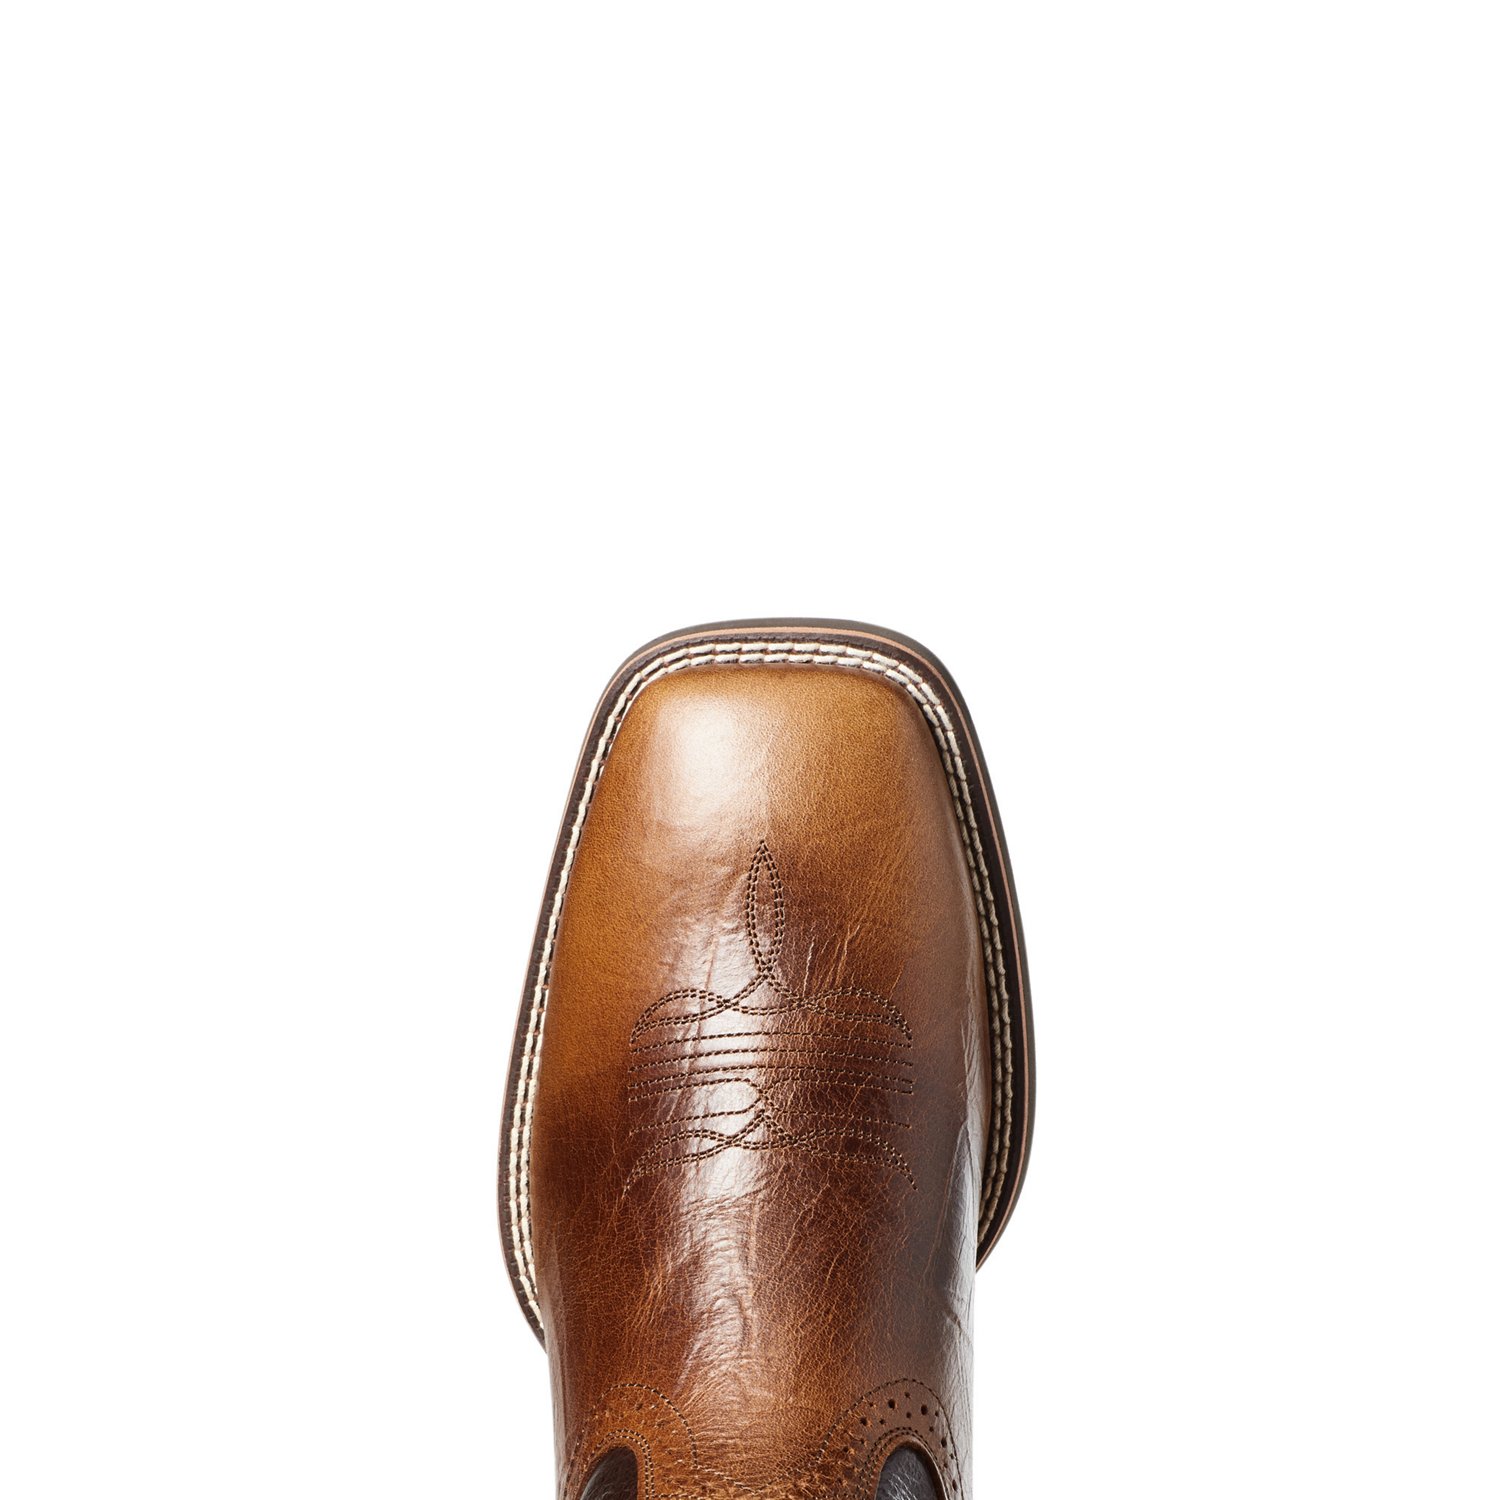 Ariat Men's Sport Wide Square Toe Western Boots | Academy